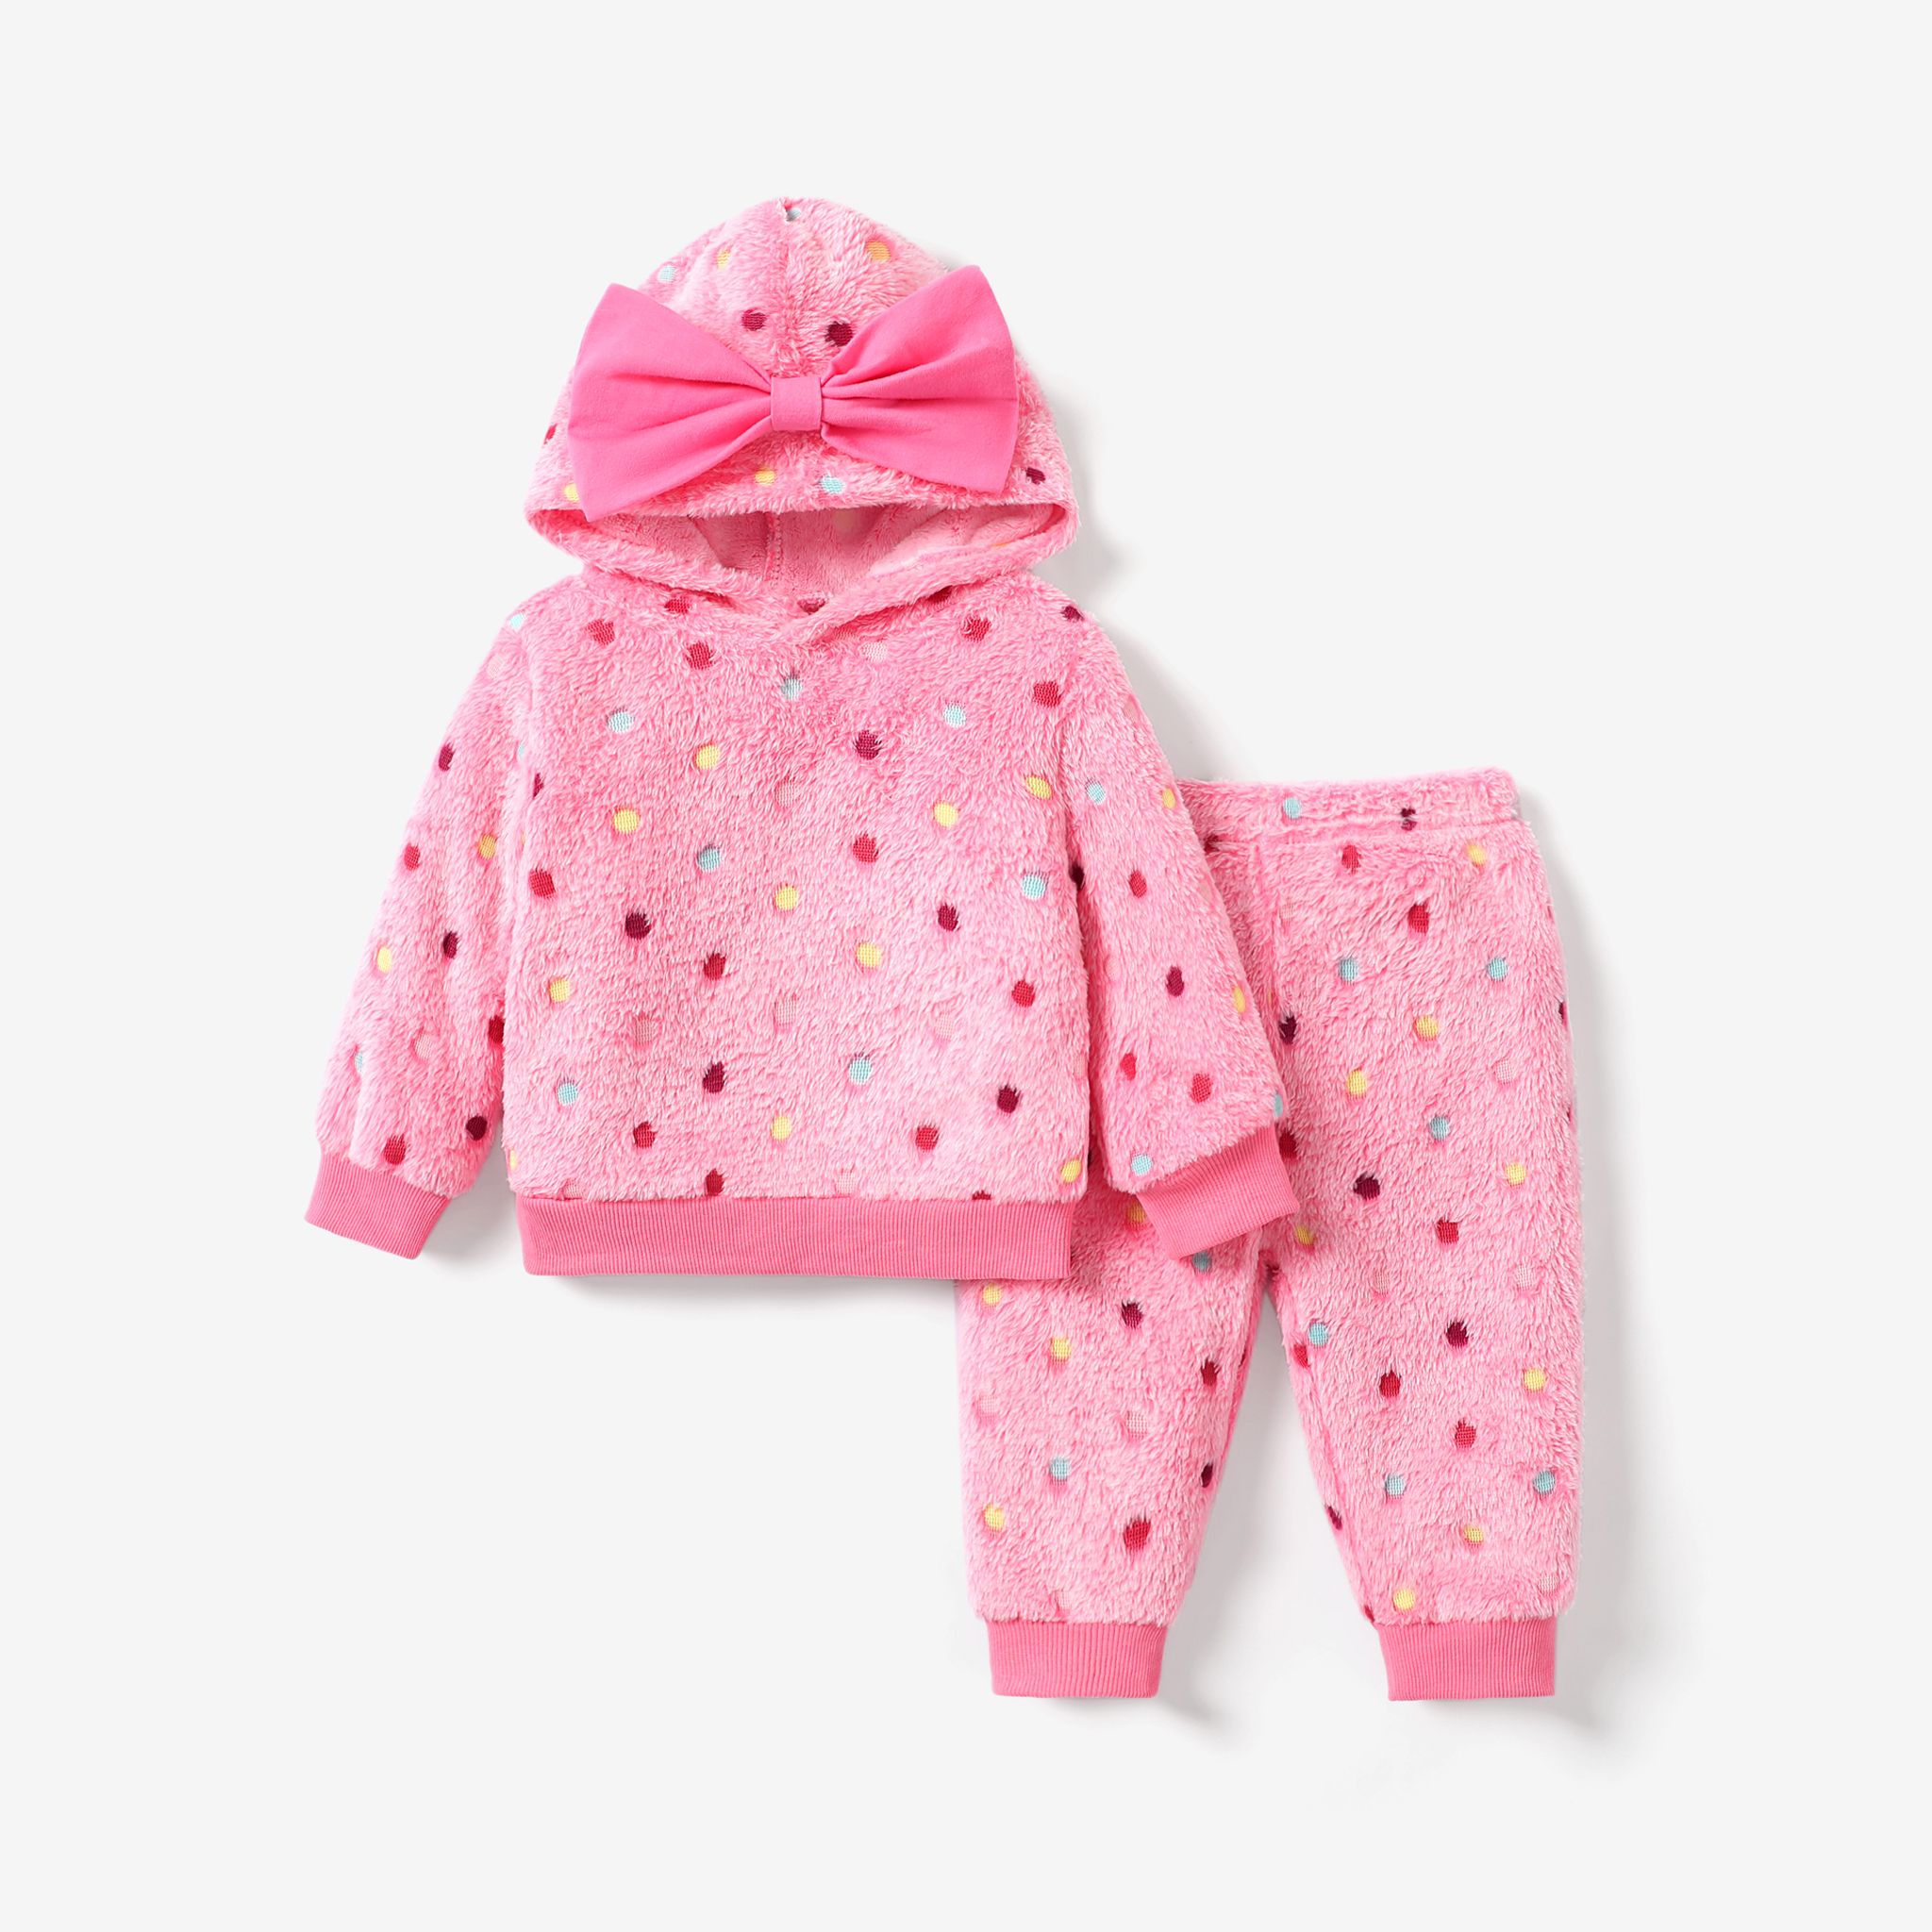 2pcs Baby Girl Sweet Polka Dot Flannel Set With Big Bowknot Hood - Colorfast And Soft